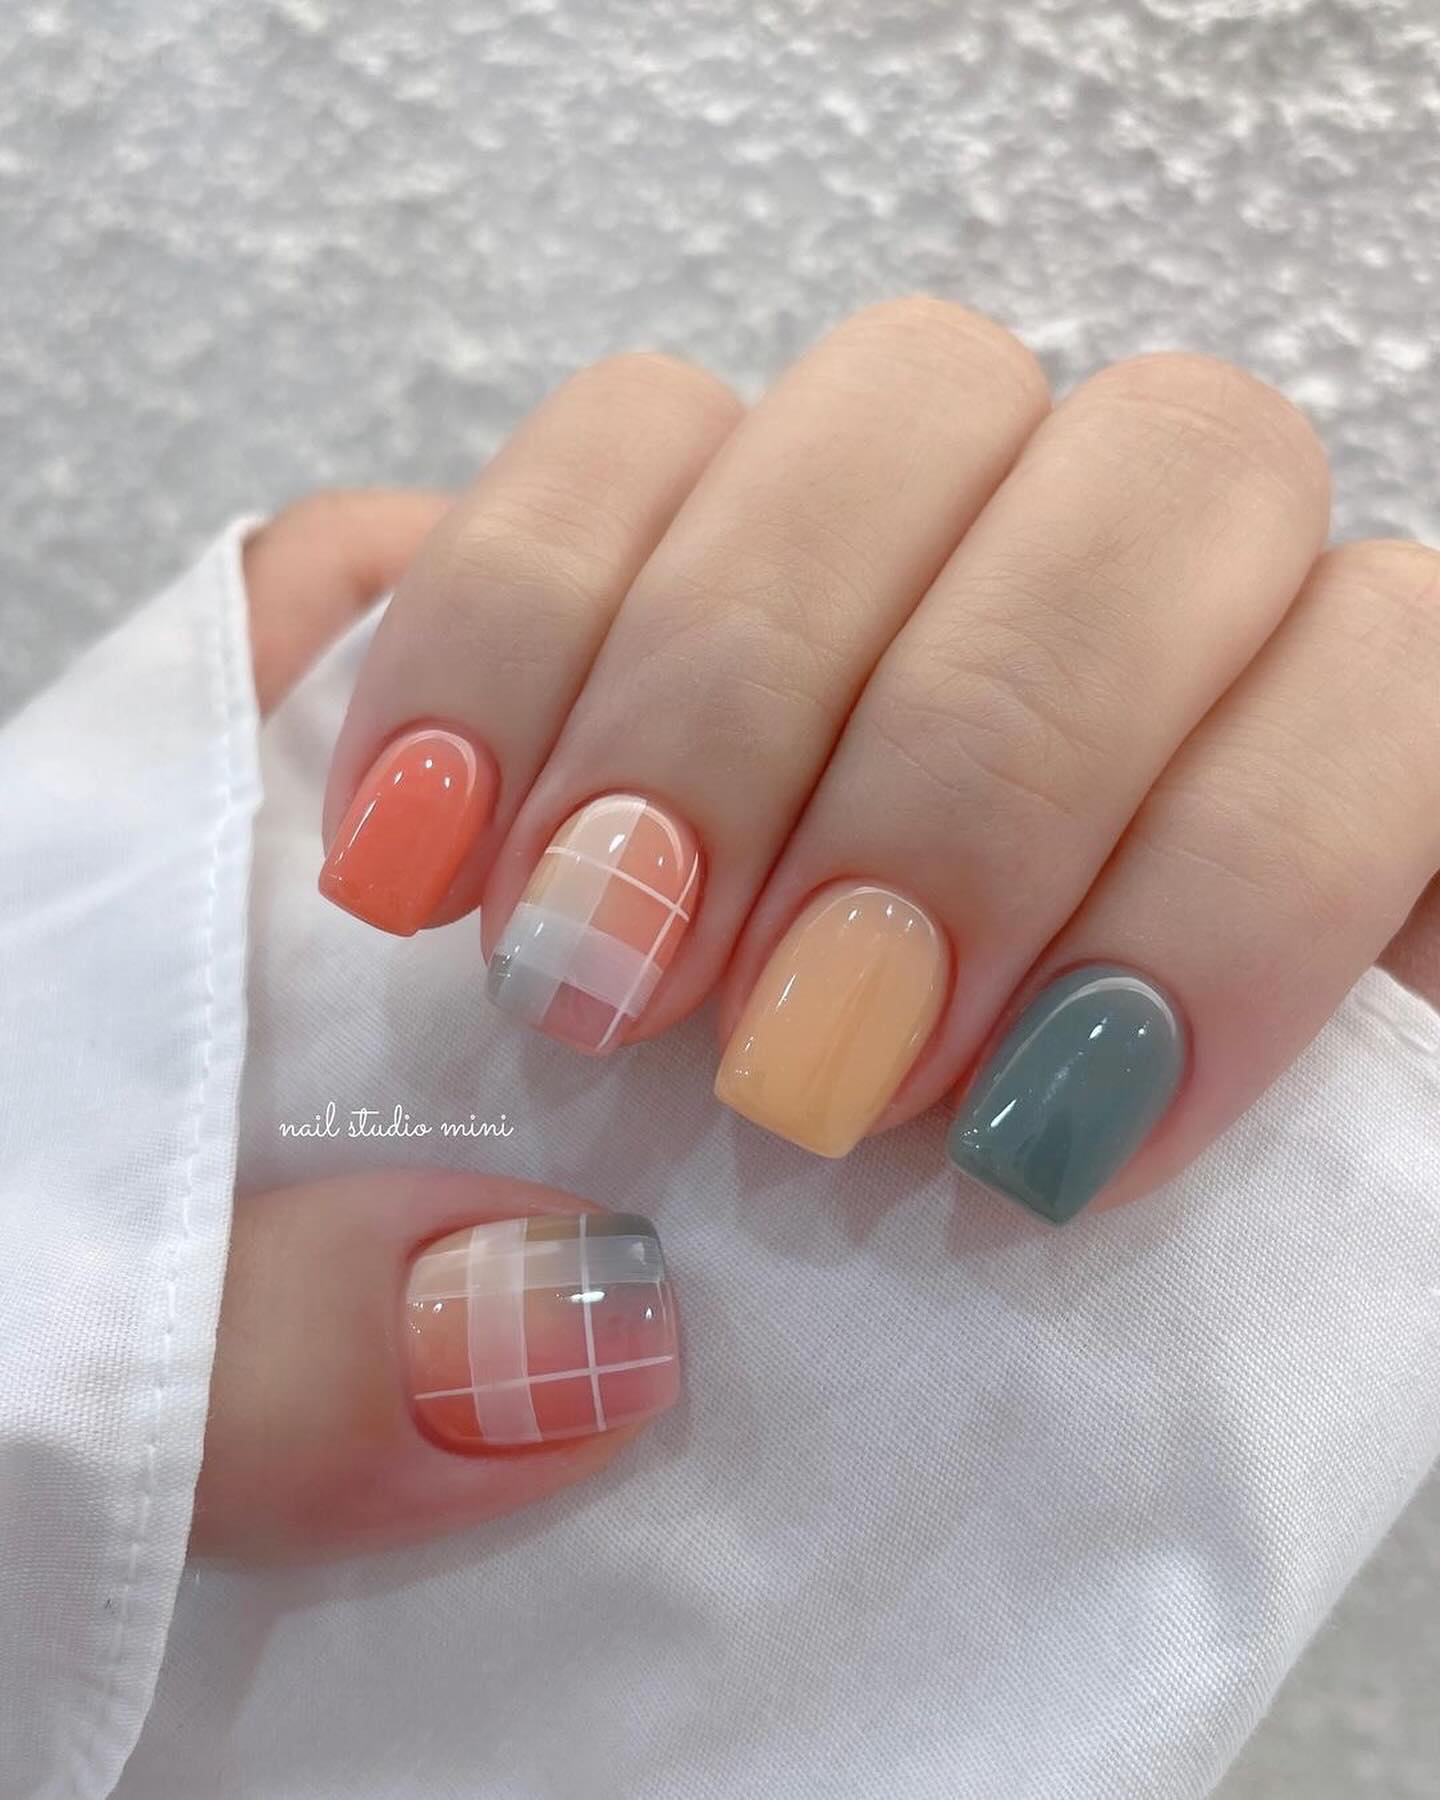 100+ Short Nail Designs You’ll Want To Try This Year images 19